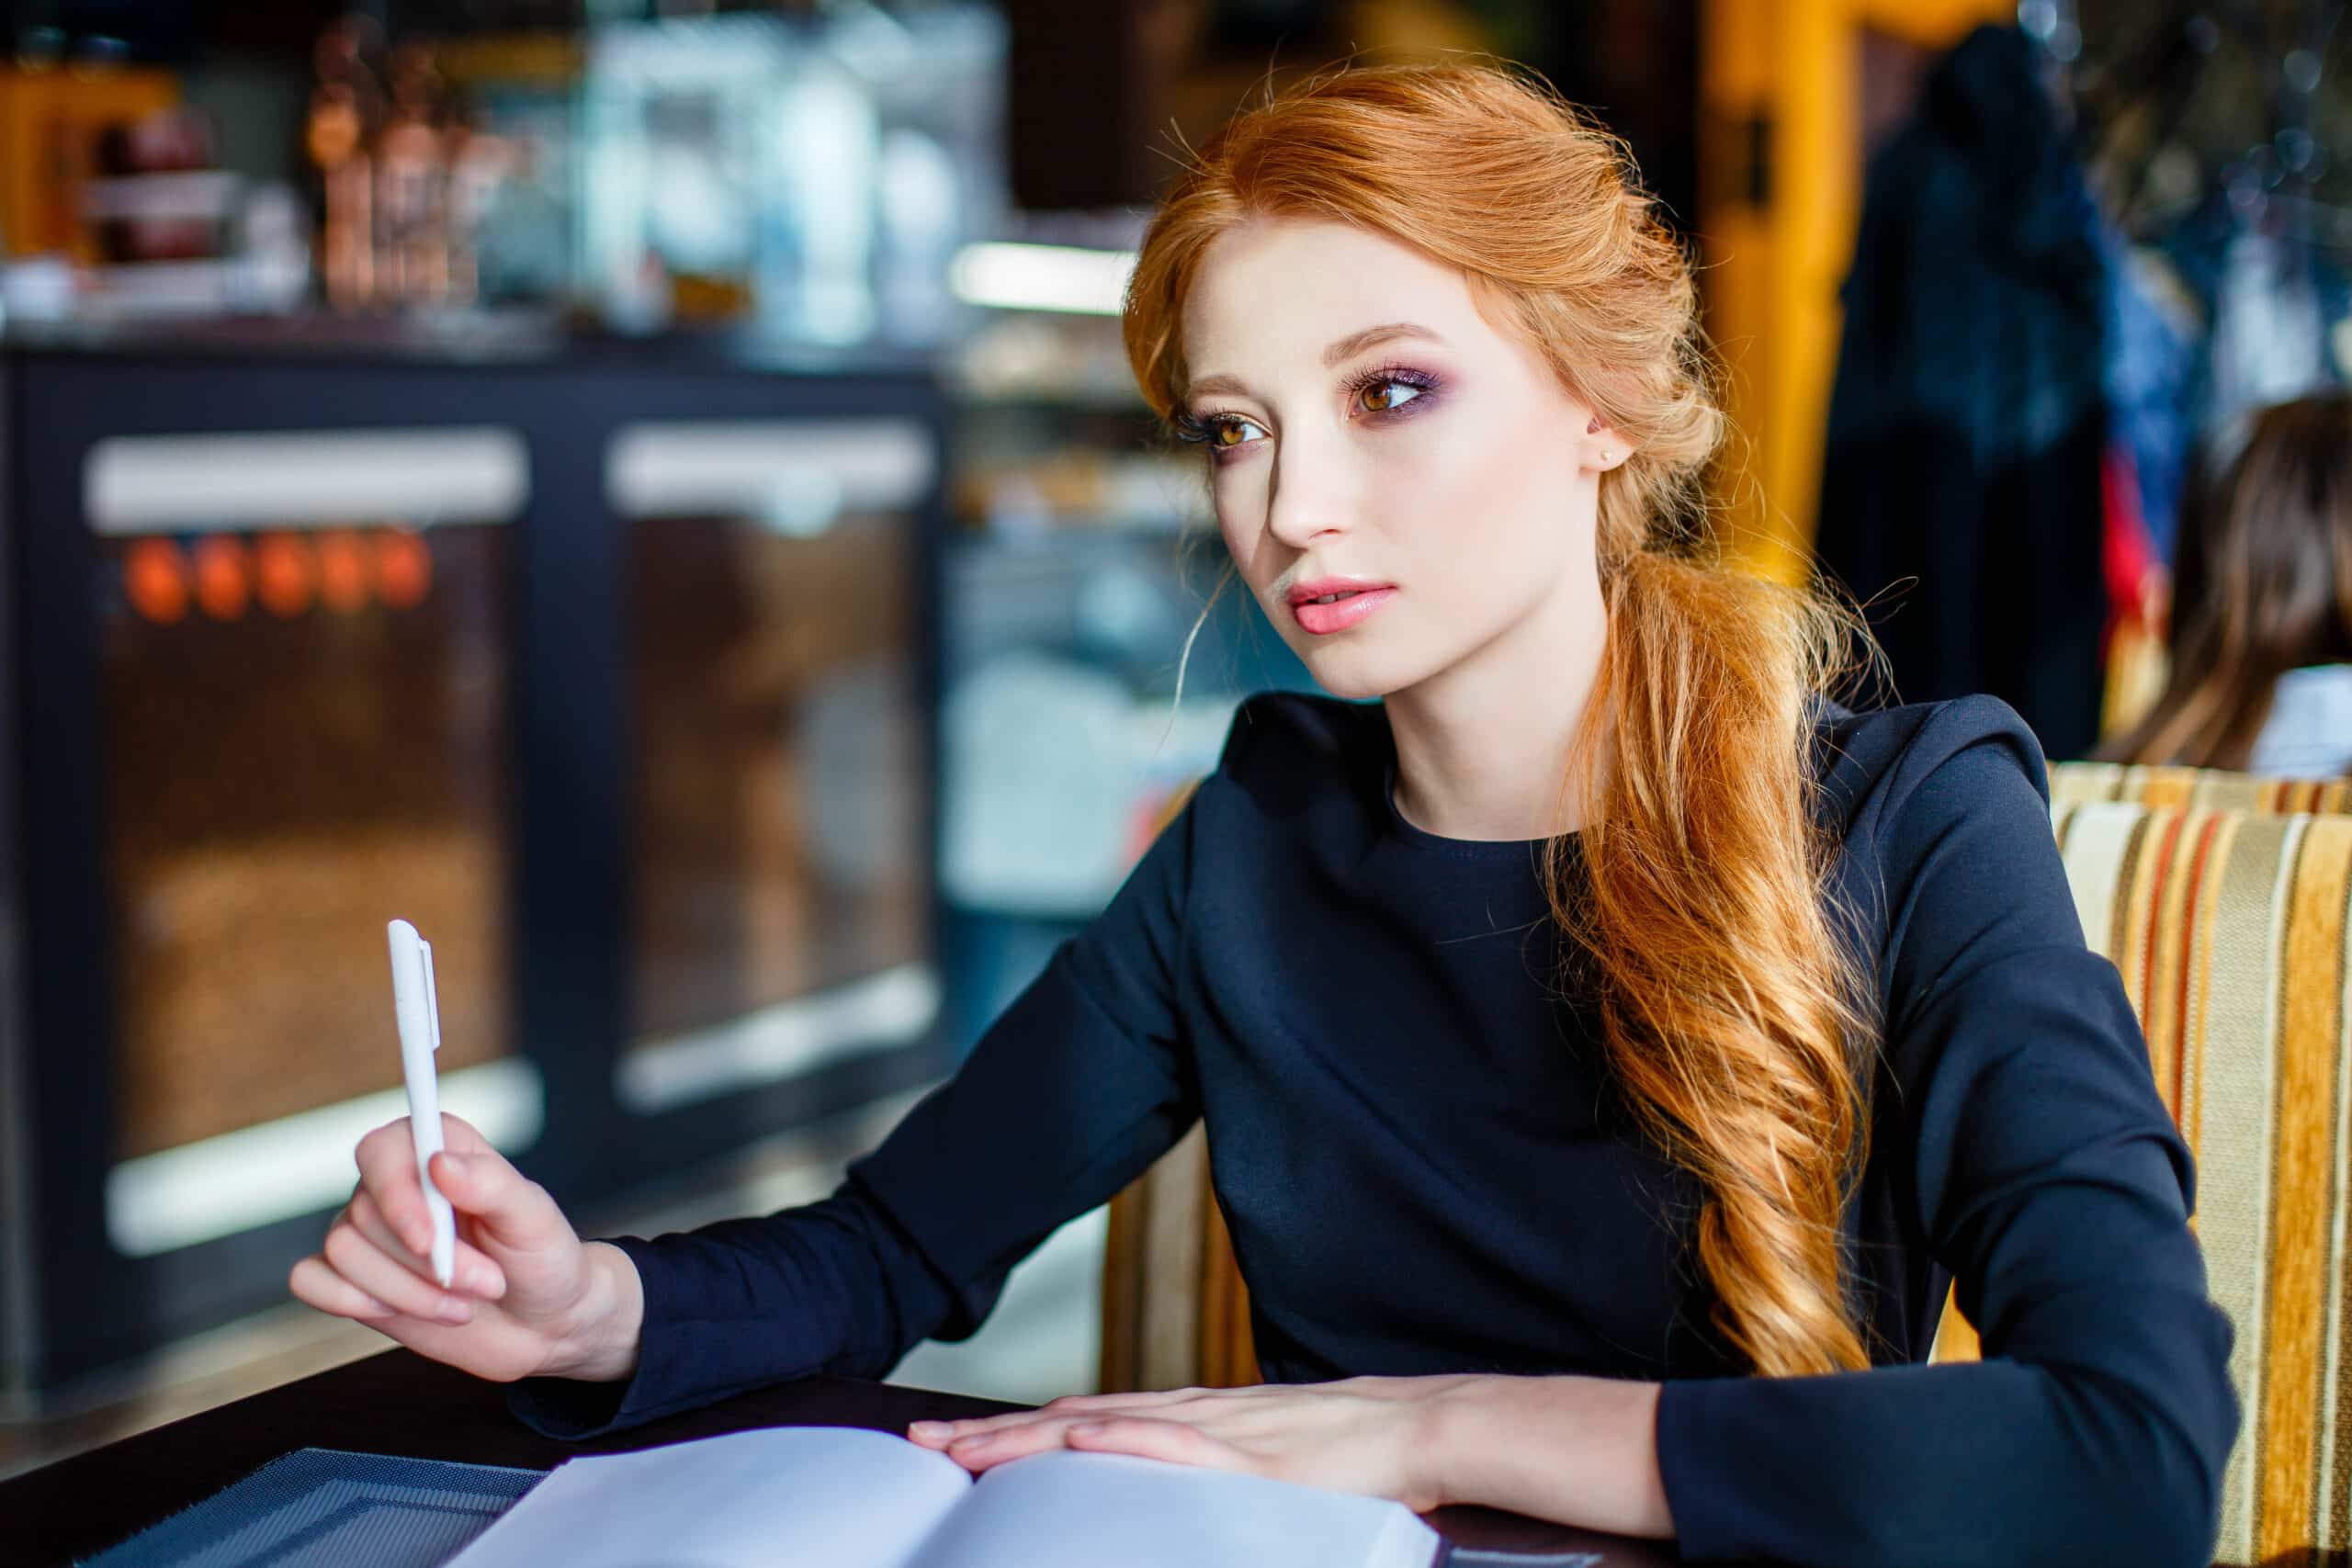 Young woman redhead writing in a cafe